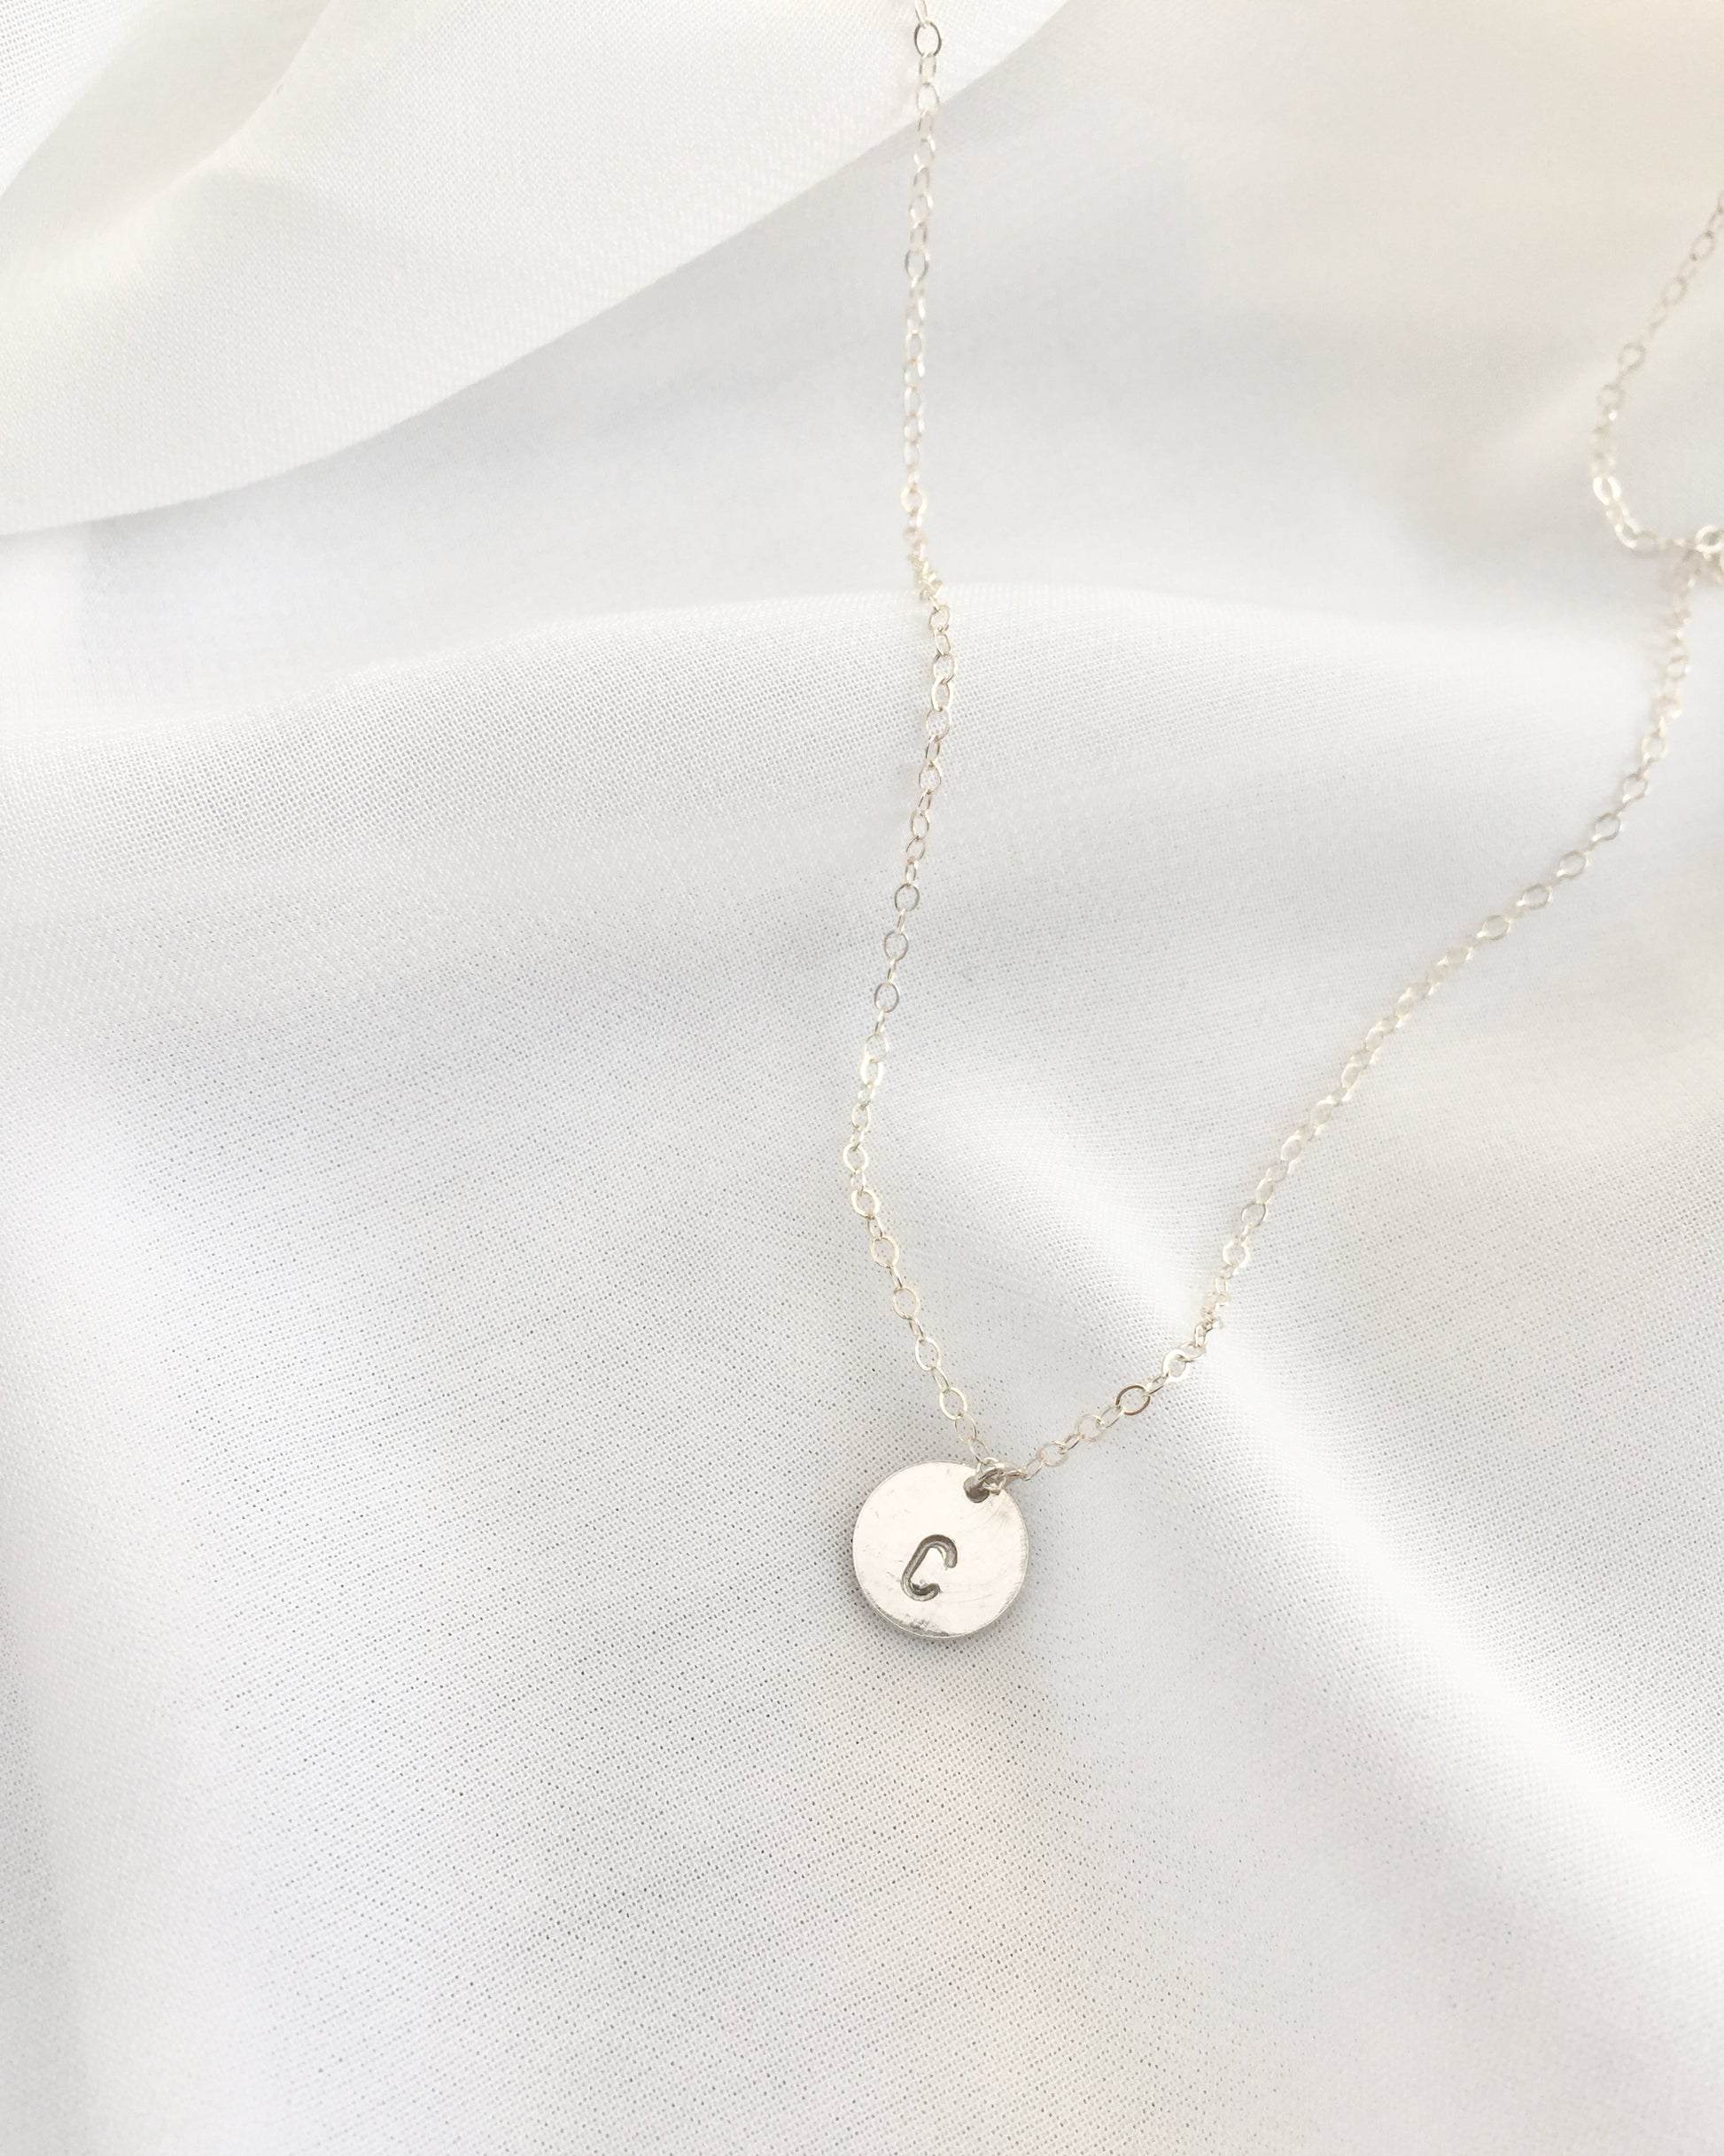 Disc Monogram Necklace - Sterling Silver & Gold Sterling Silver